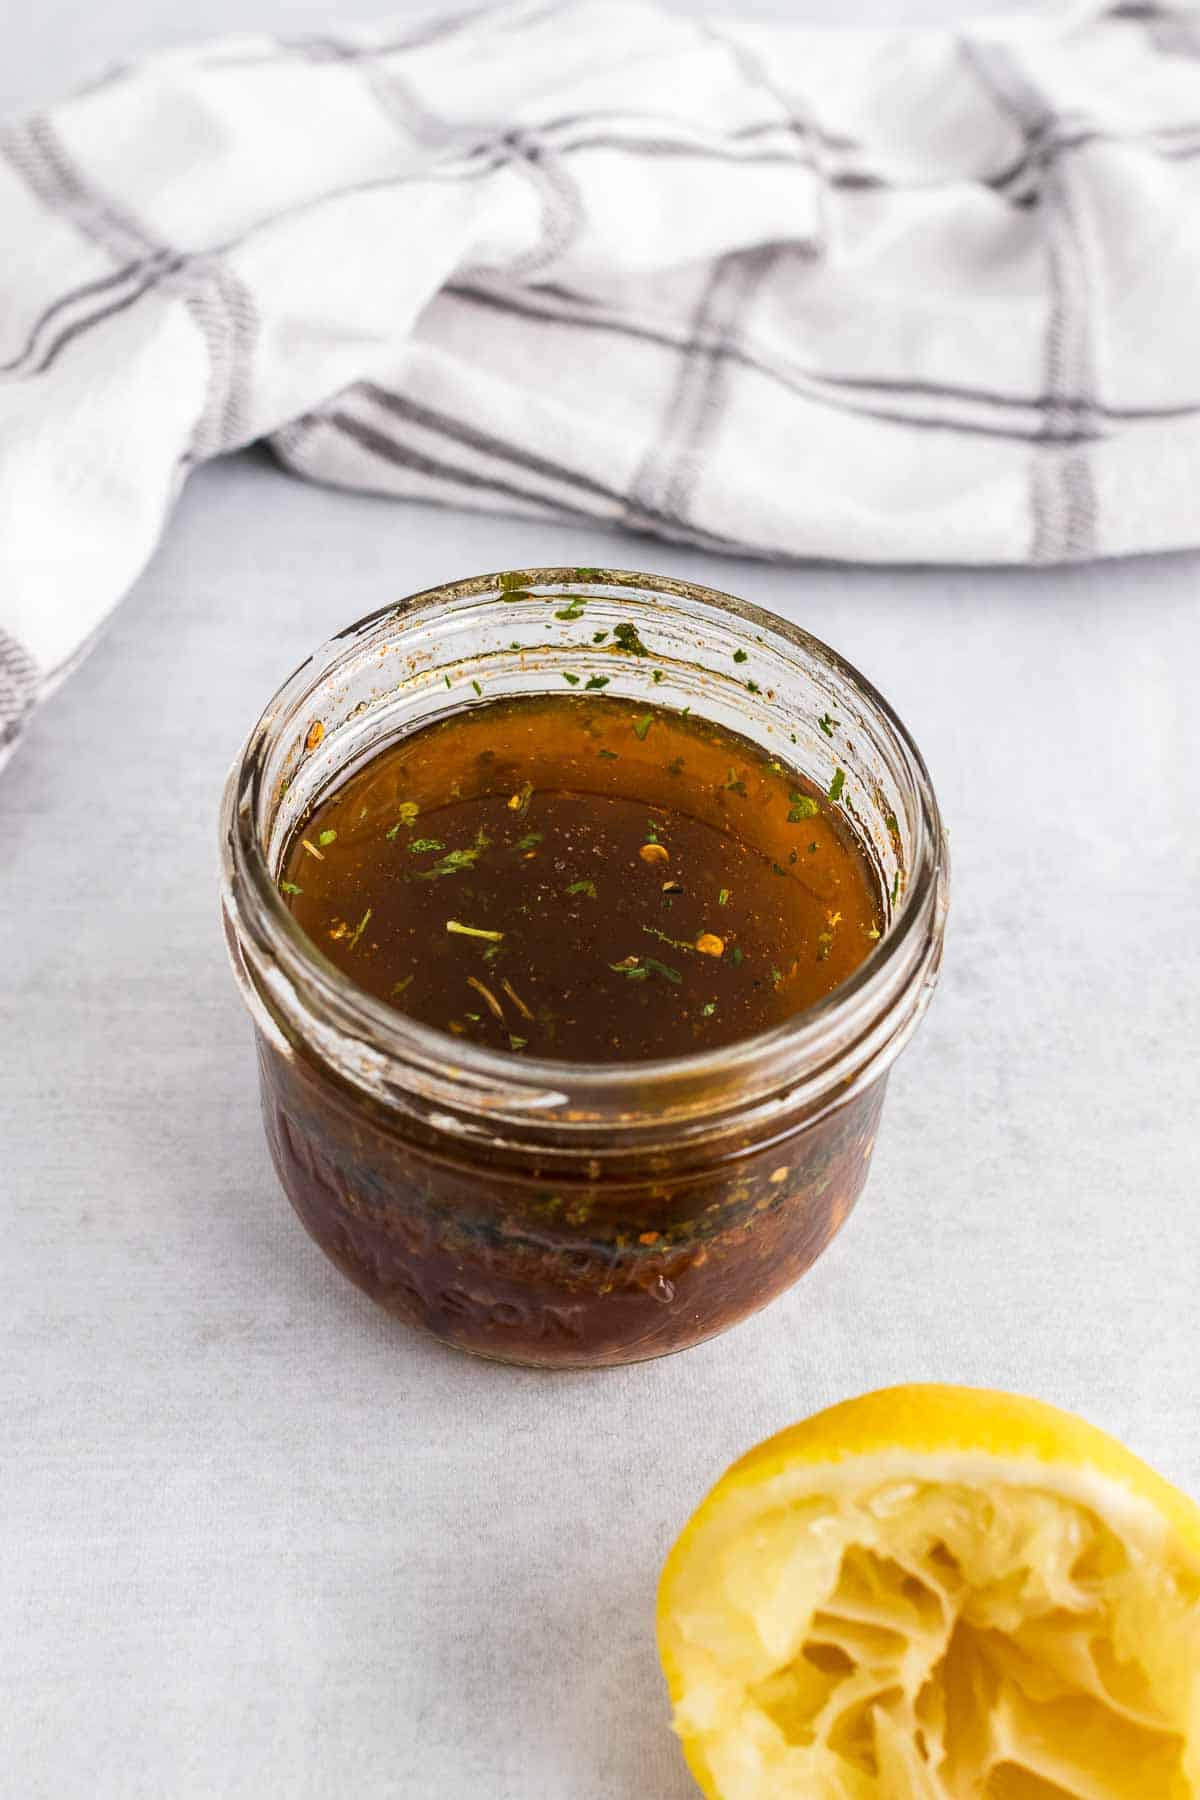 Marinade in a glass jar next to a squeezed lemon half